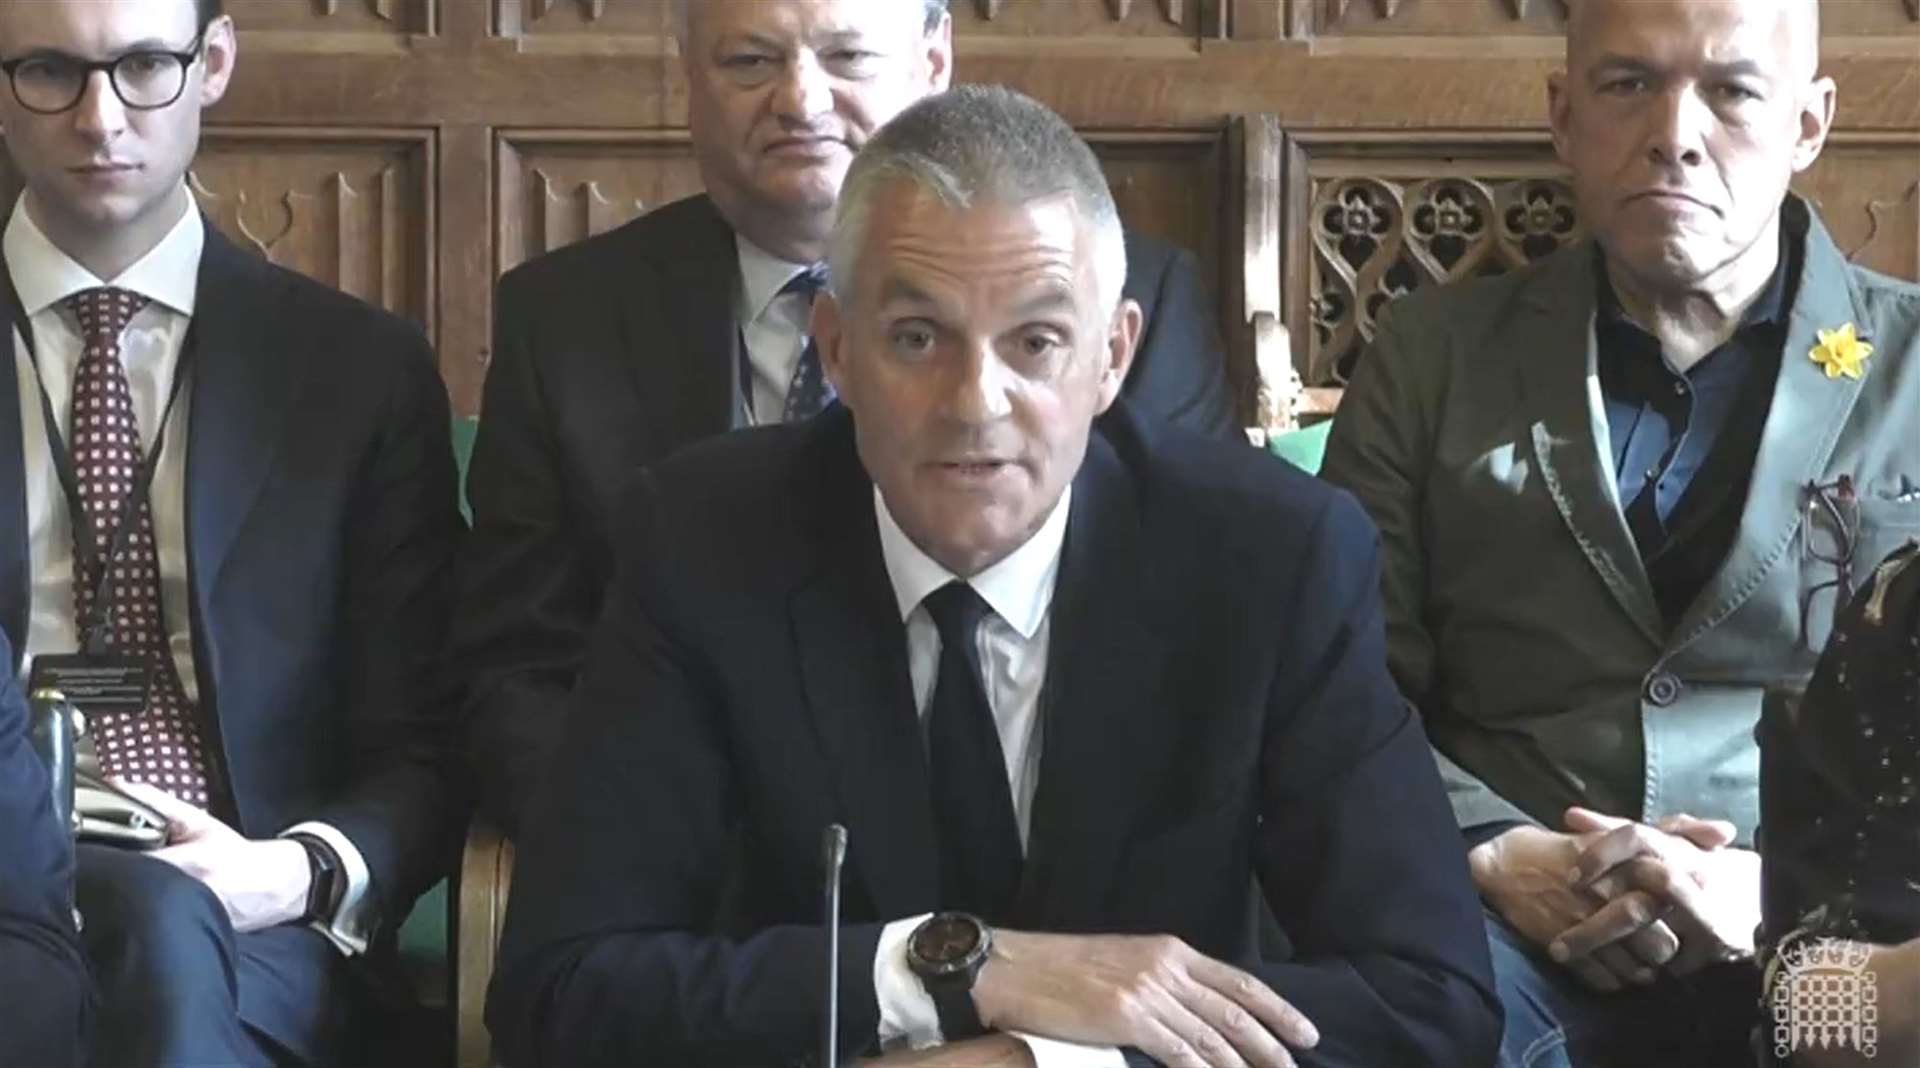 Tim Davie, director general of the BBC appearing before the Culture, Media and Sport Committee at the House of Commons (House of Commons/UK Parliament/PA)